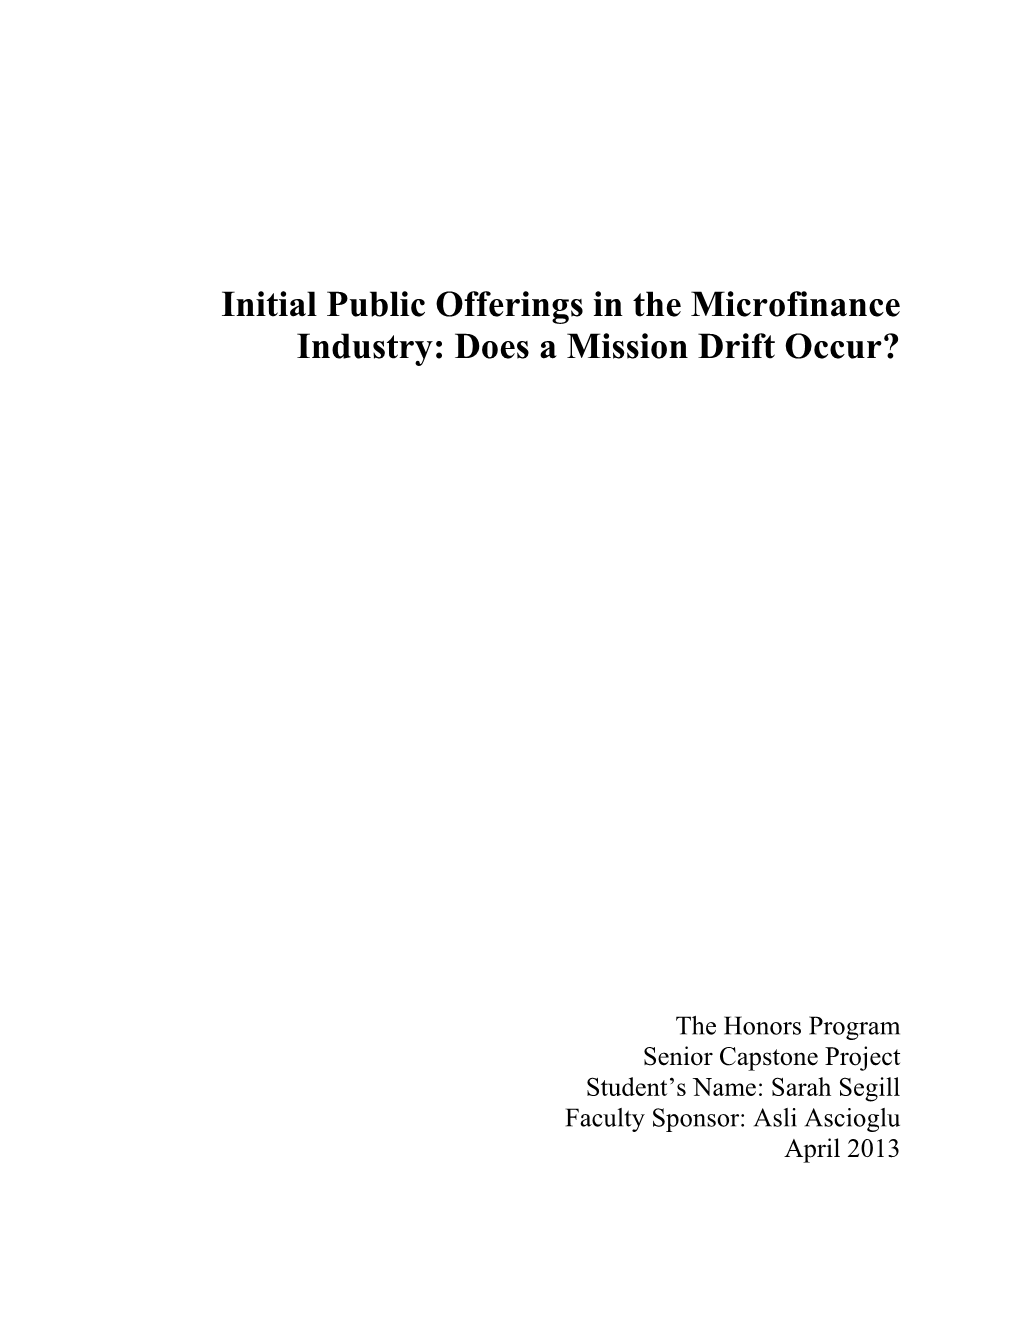 Initial Public Offerings in the Microfinance Industry: Does a Mission Drift Occur?